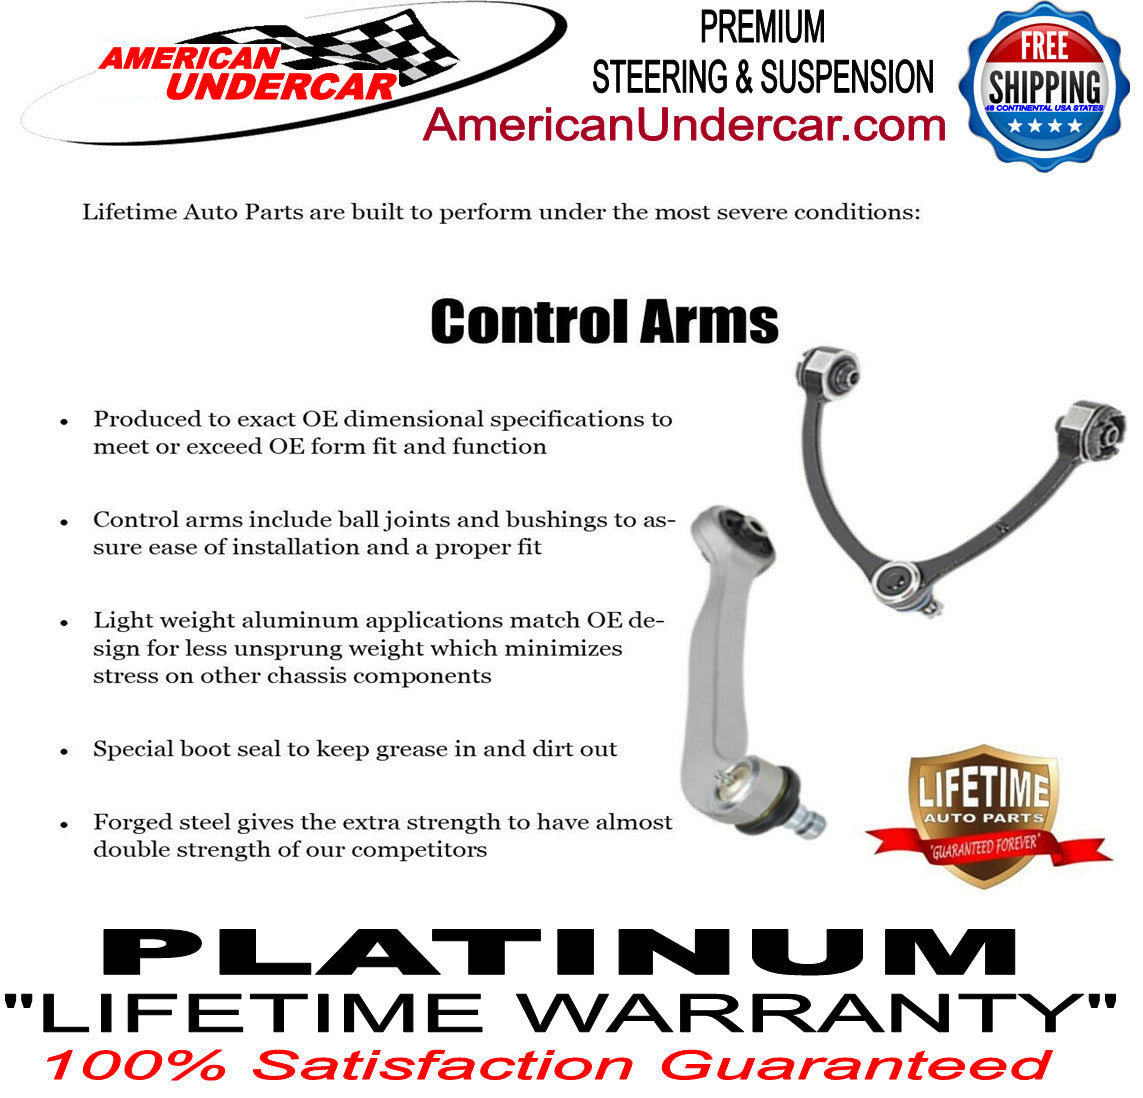 Lifetime Drag Link Tie Rod Ball Joint Steering Kit for 2008-2010 Ford F250, F350 Super Duty 4x4